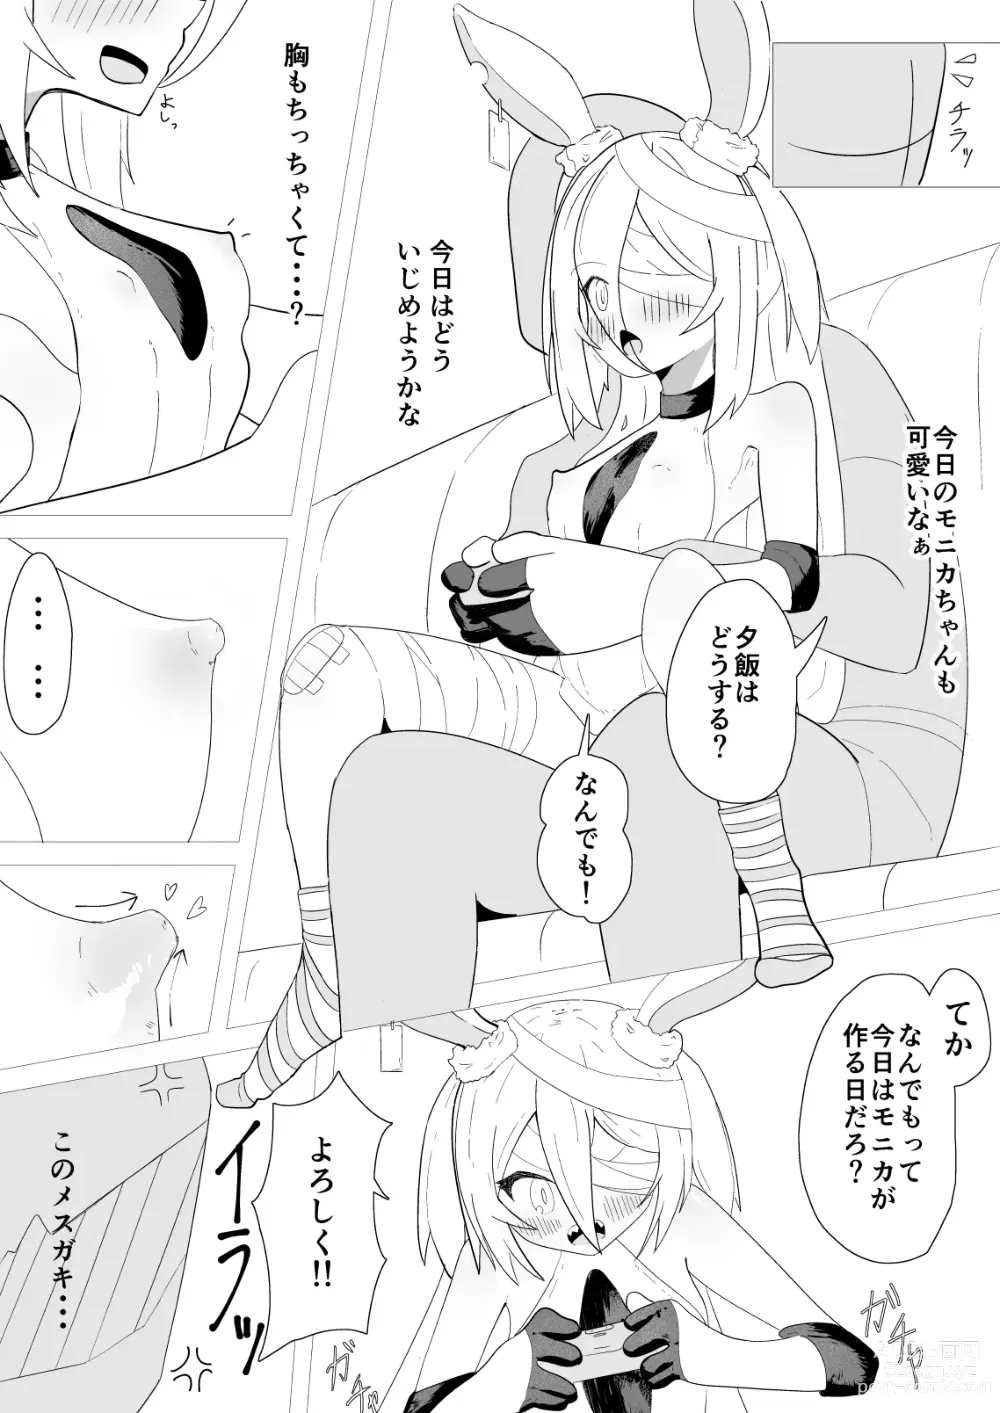 Page 6 of doujinshi 隅々四隅s illustrations - pixiv